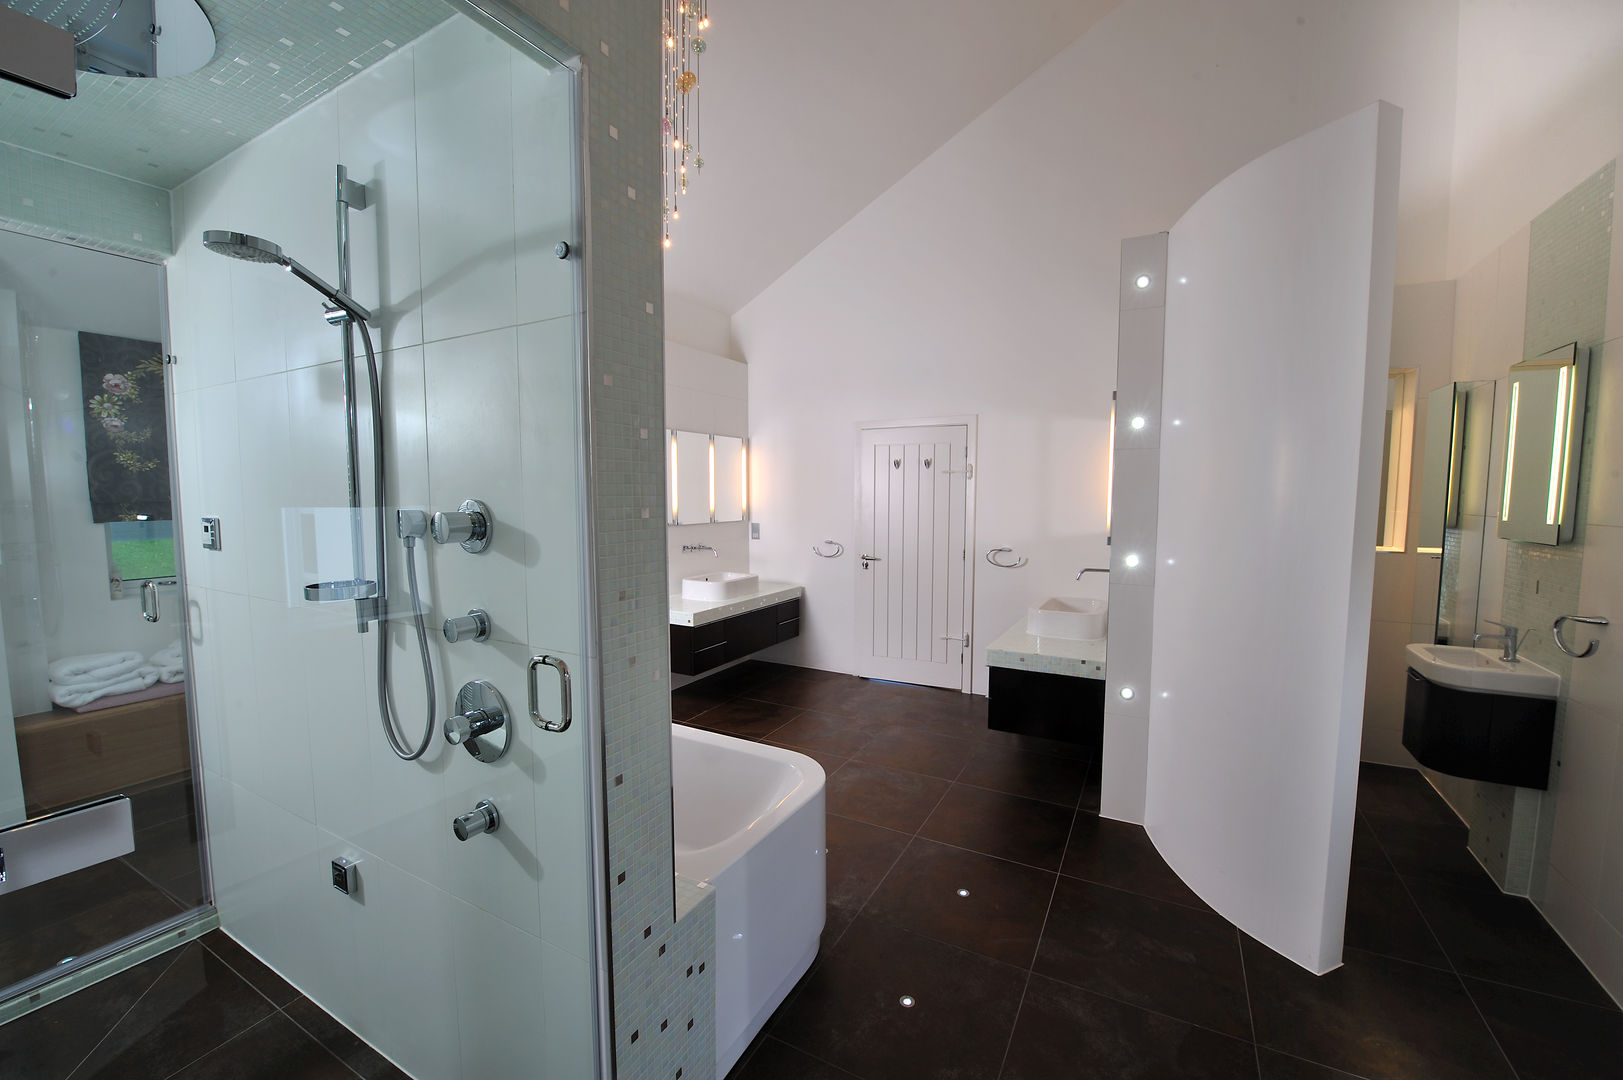 Sea House, Porth | Cornwall, Perfect Stays Perfect Stays ห้องน้ำ Bathroom,ensuite,wall hung basin,walk in shower,luxury,modern,beach house,holiday home